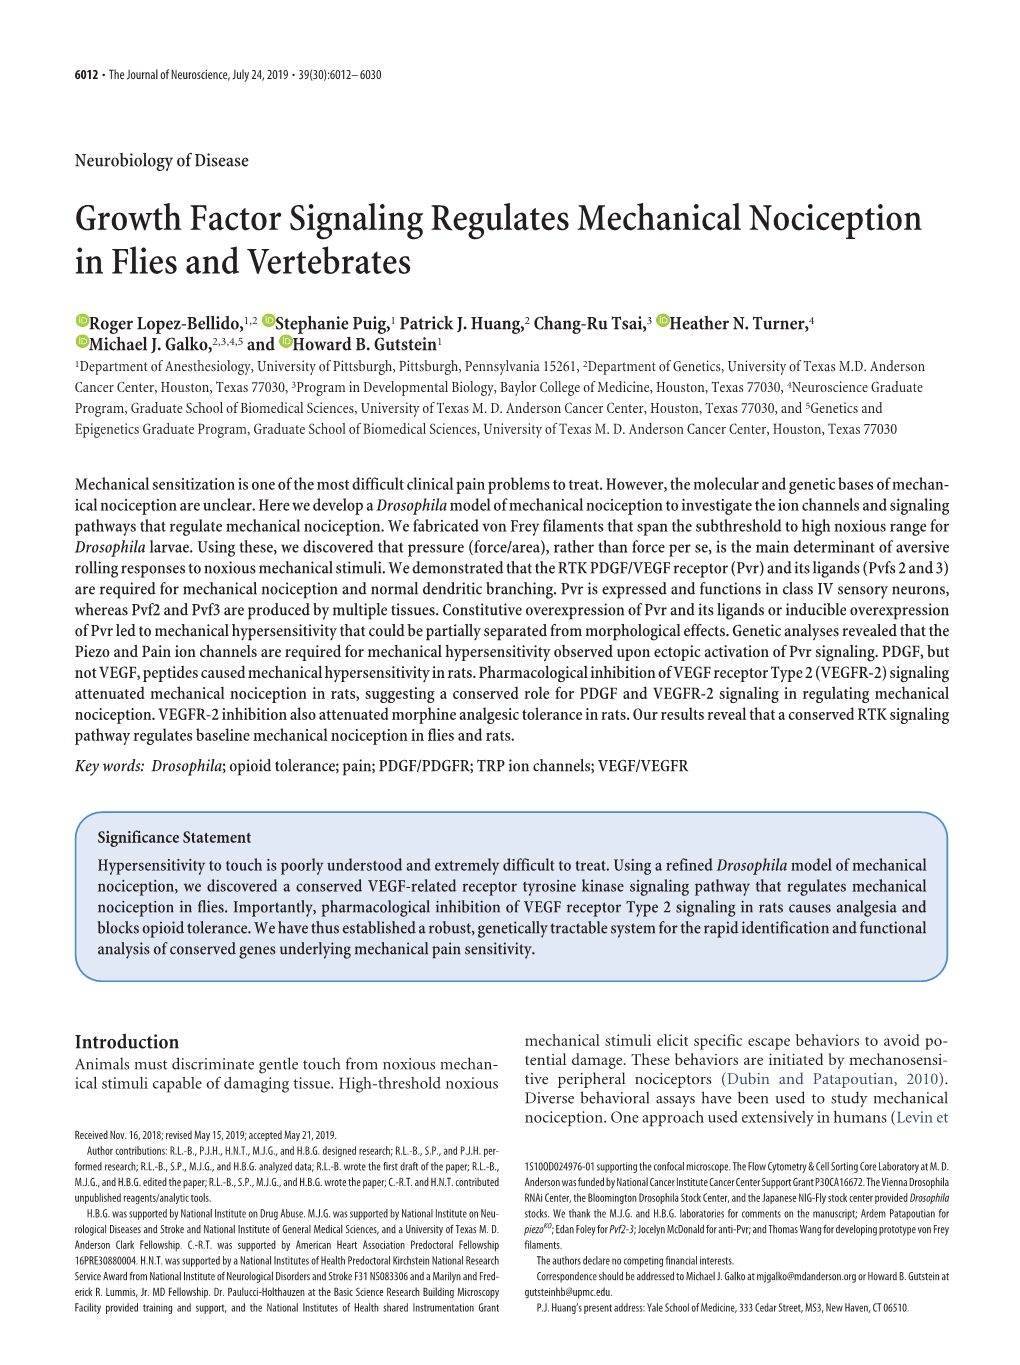 Growth Factor Signaling Regulates Mechanical Nociception in Flies and Vertebrates